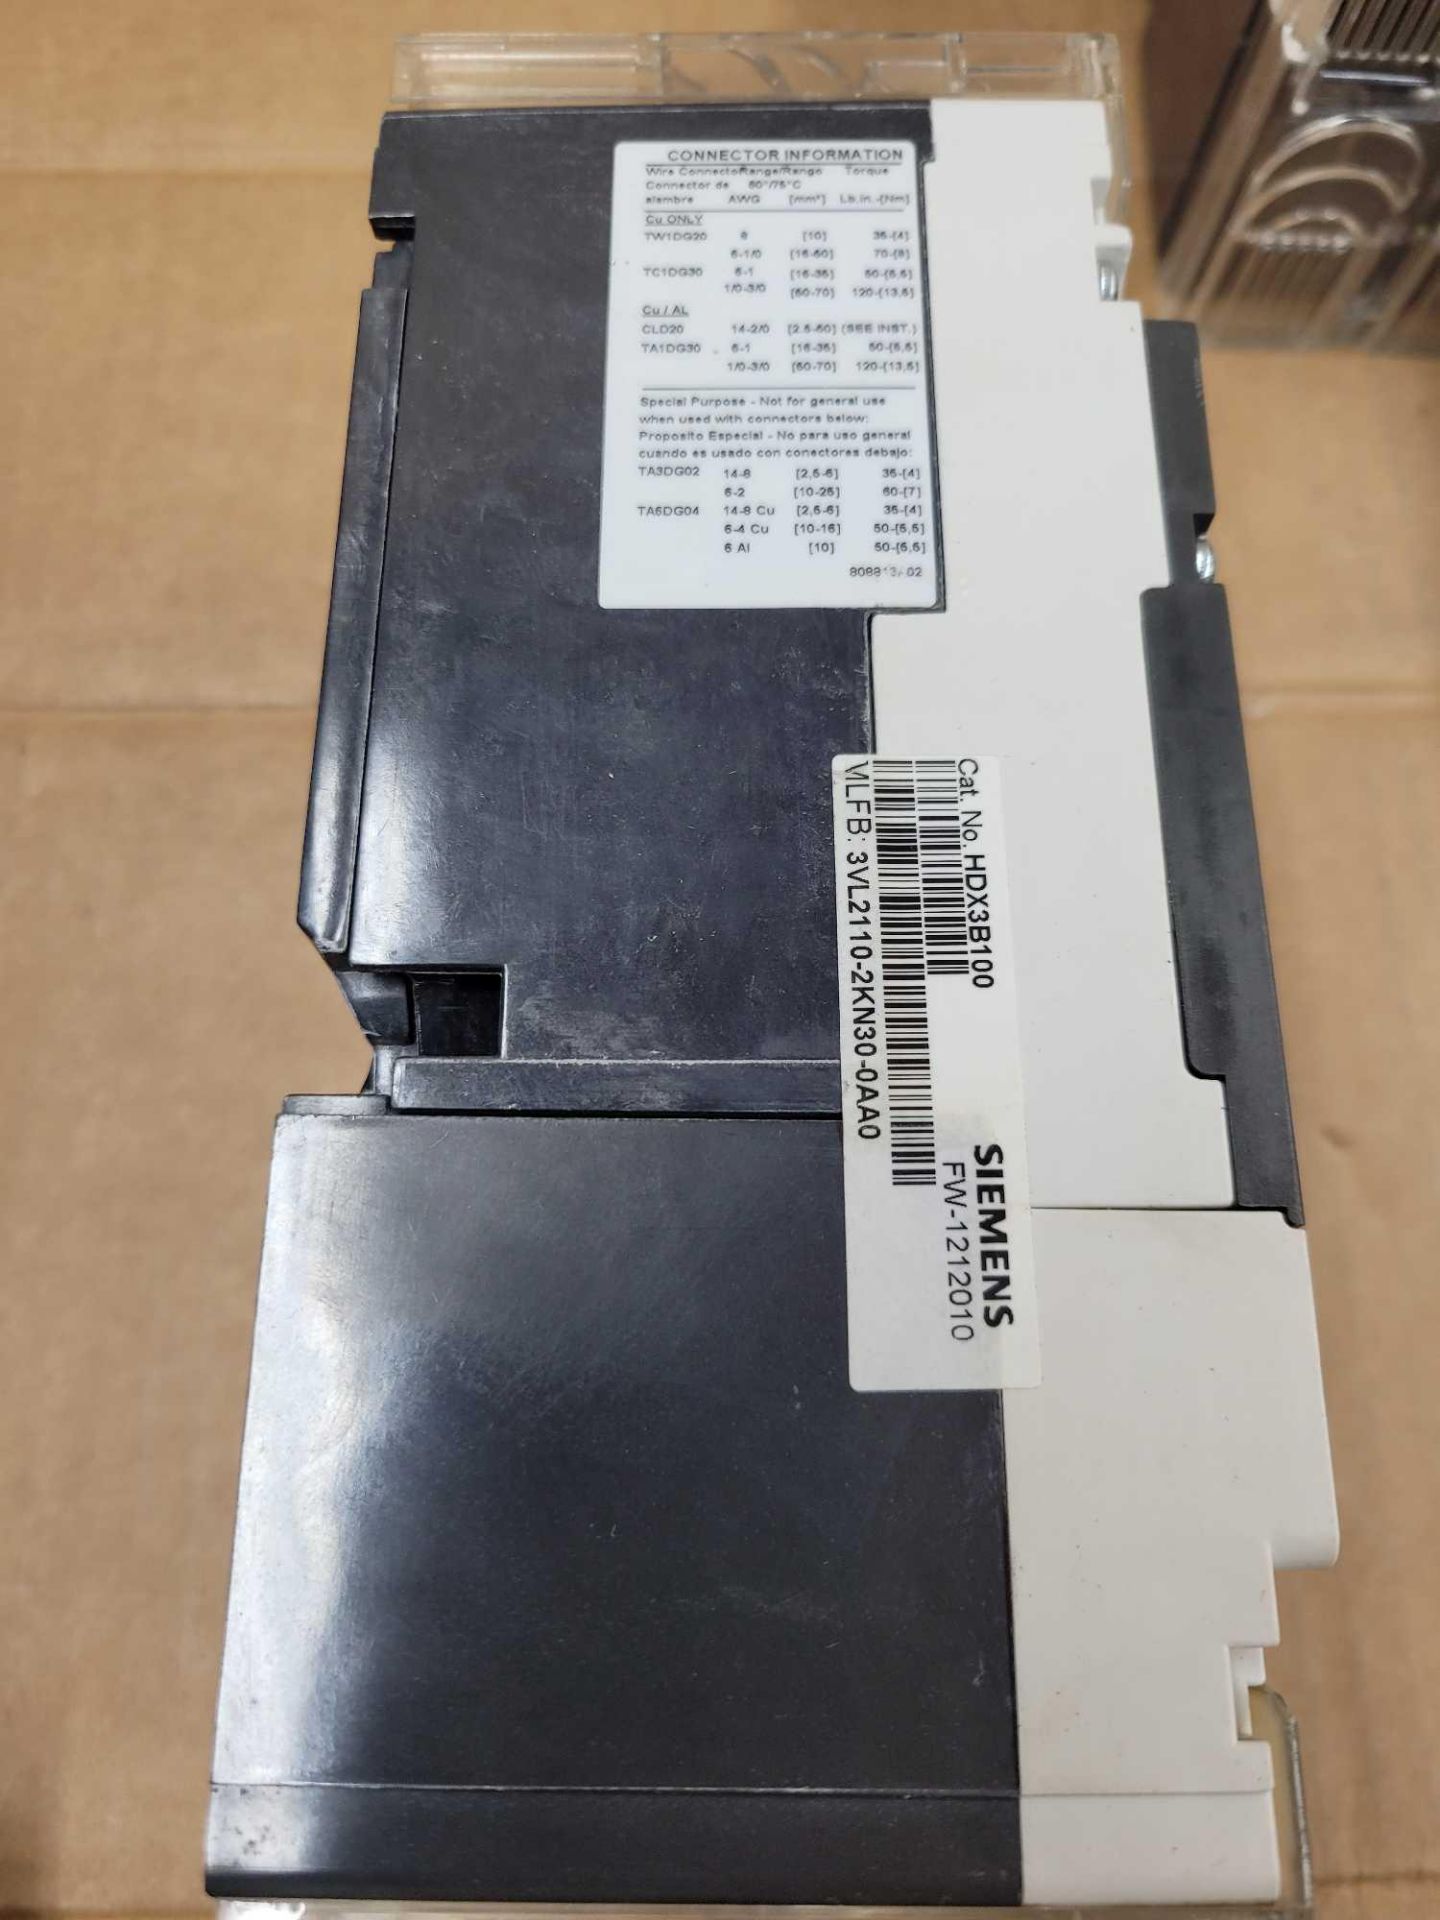 LOT OF 4 SIEMESN HDX3B100 / 100 Amp Circuit Breaker  /  Lot Weight: 19.2 lbs - Image 3 of 7